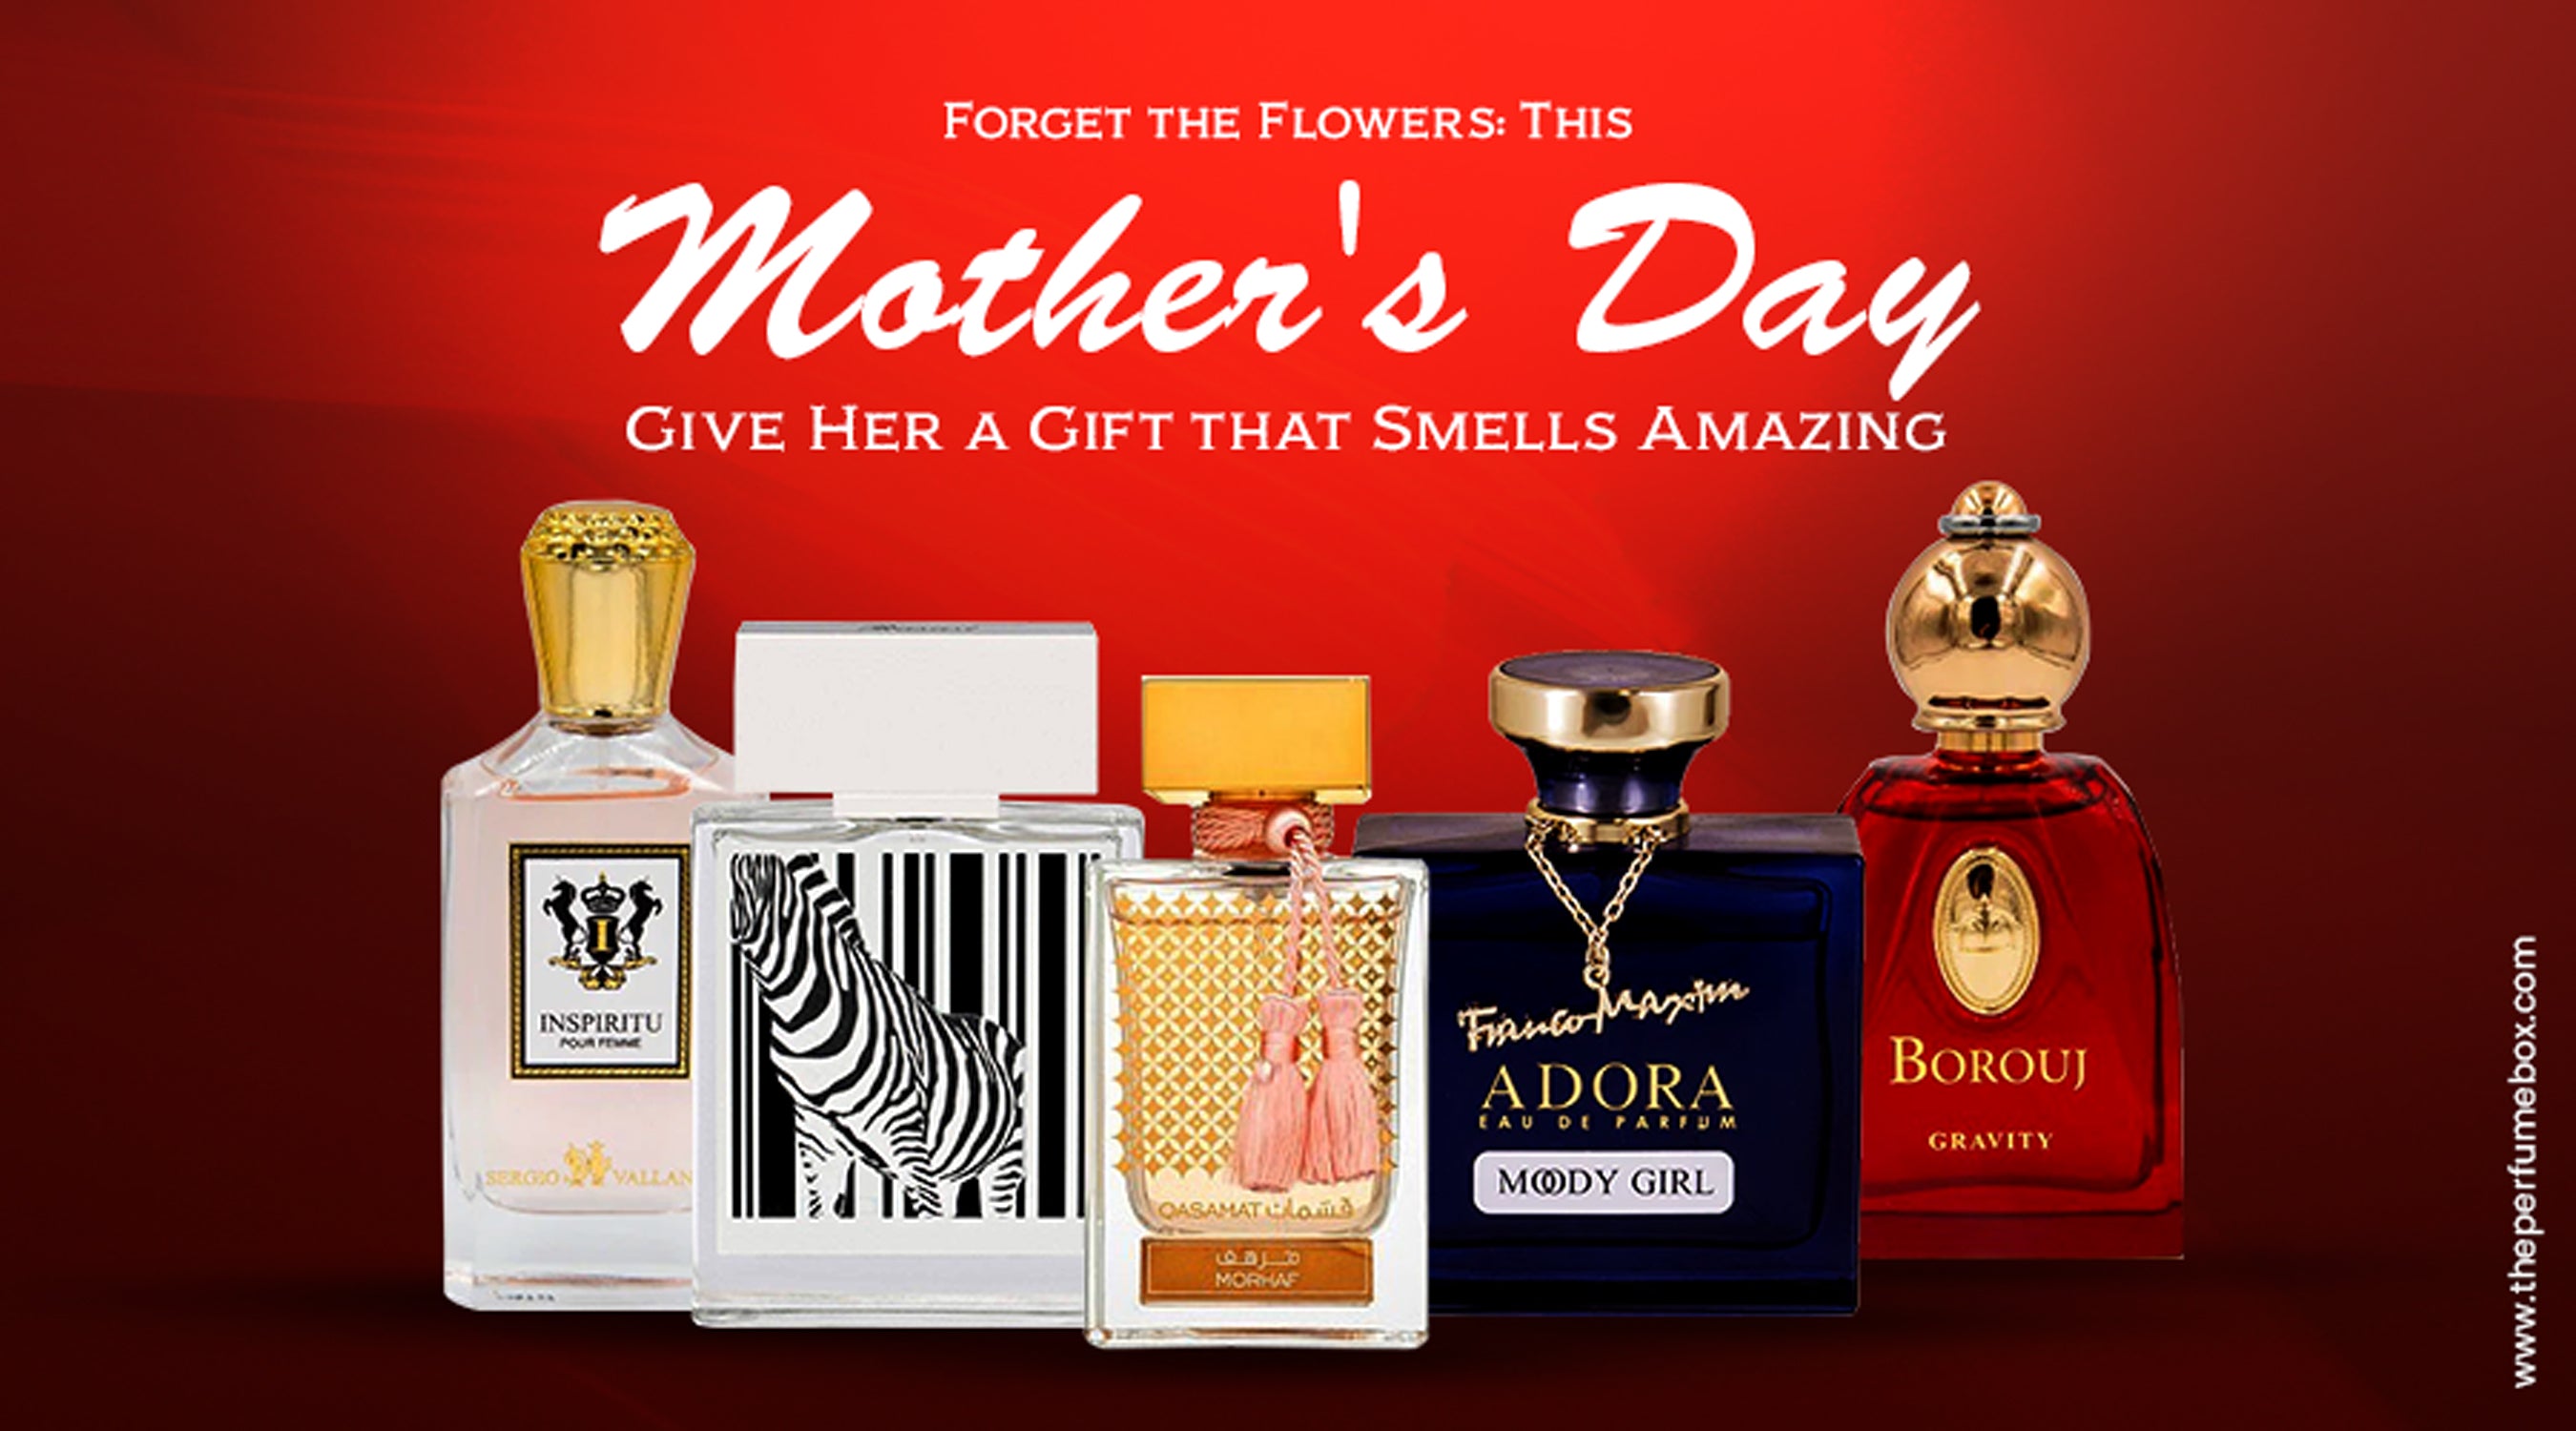 Shop Top Perfume & Cologne Brands at The Perfume Box